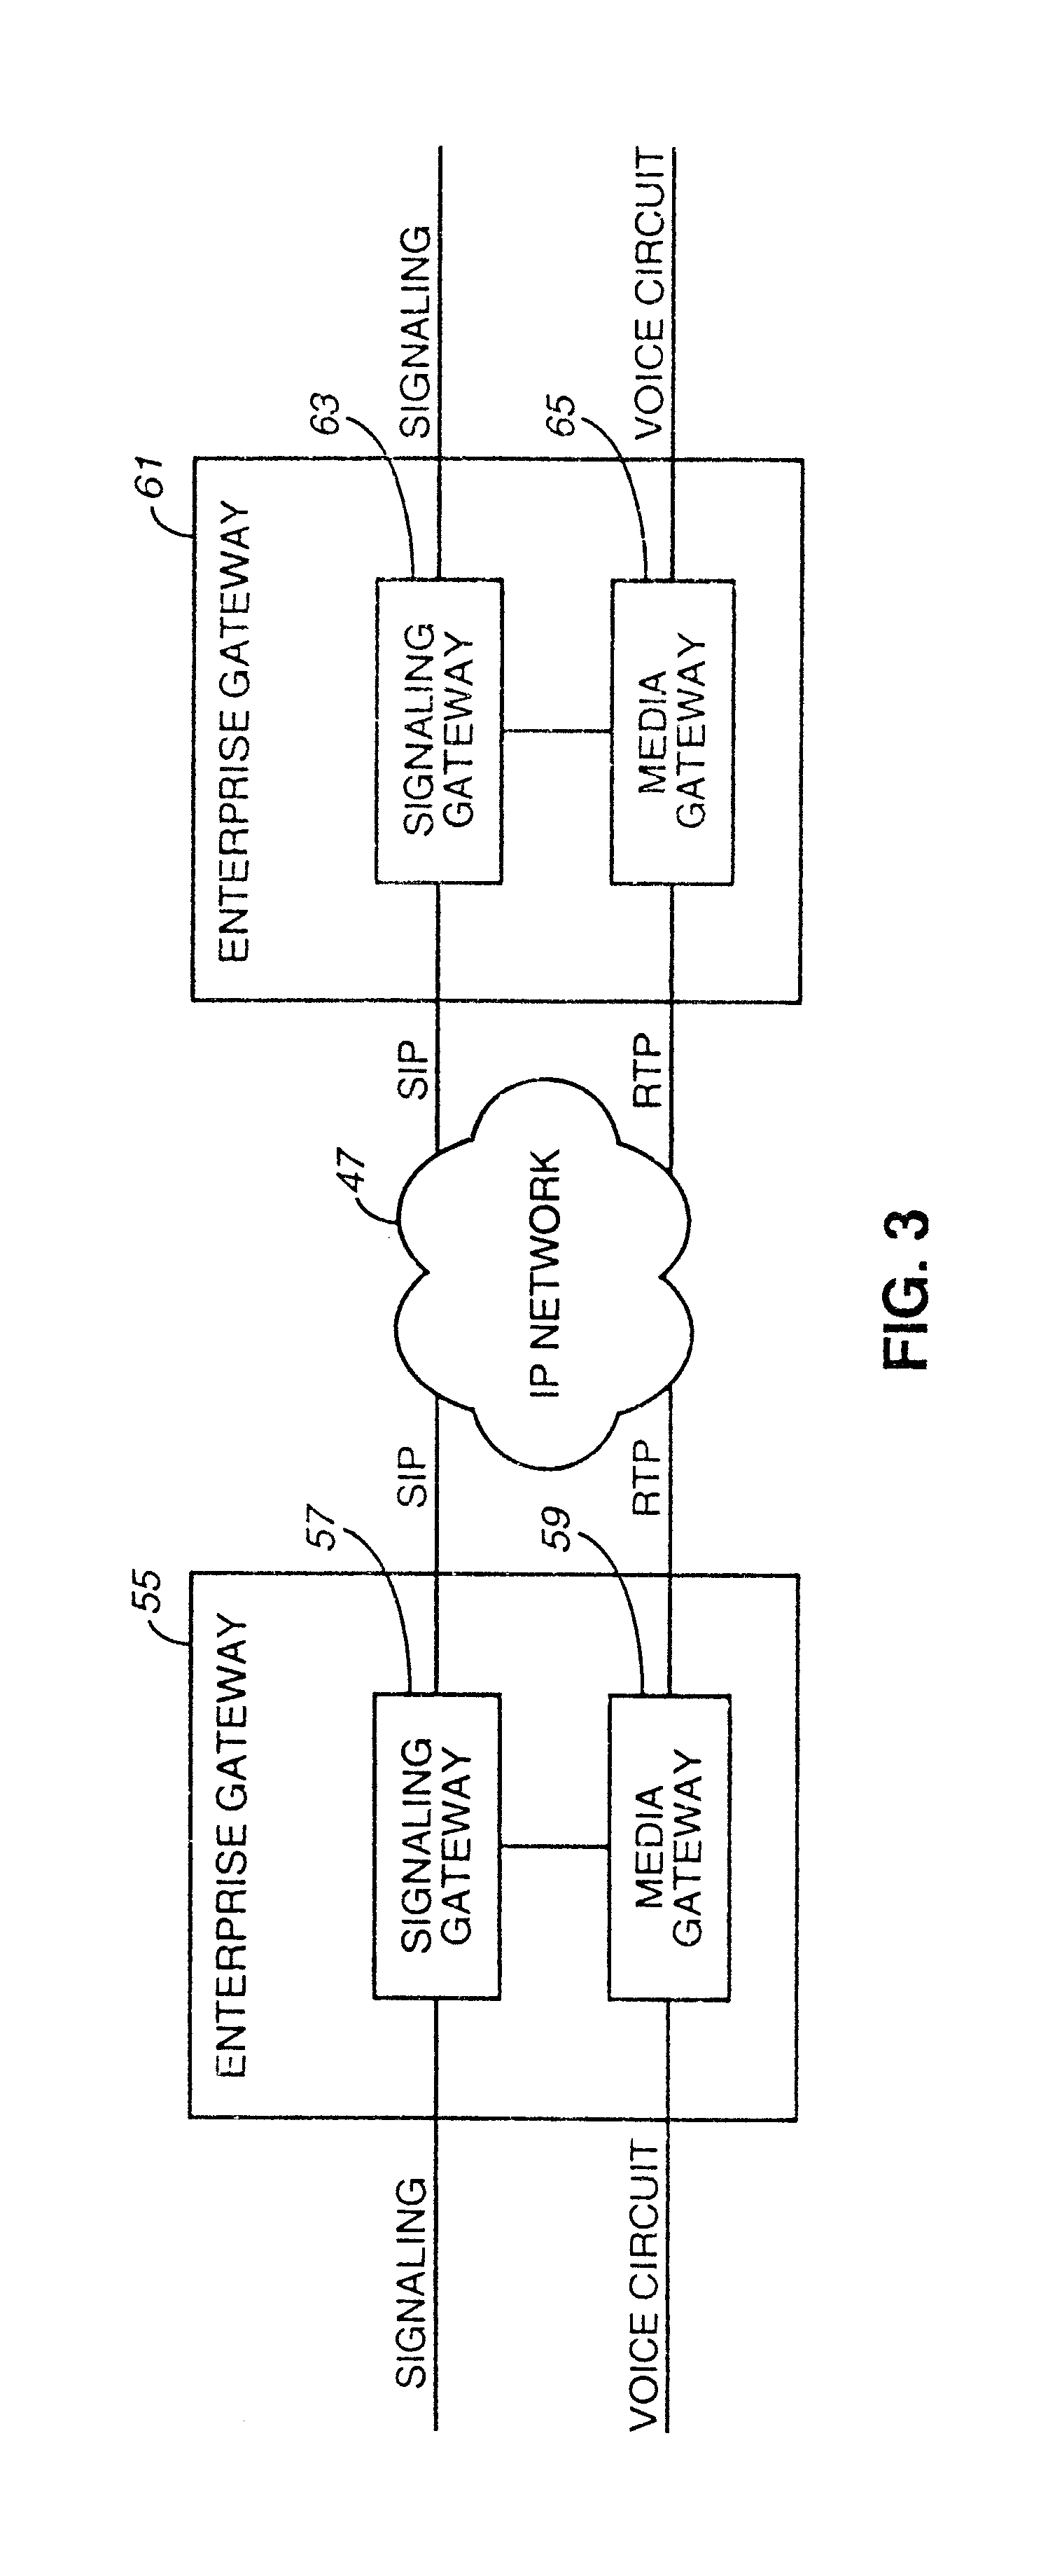 Method of and system for extending internet telephony over virtual private network direct access lines